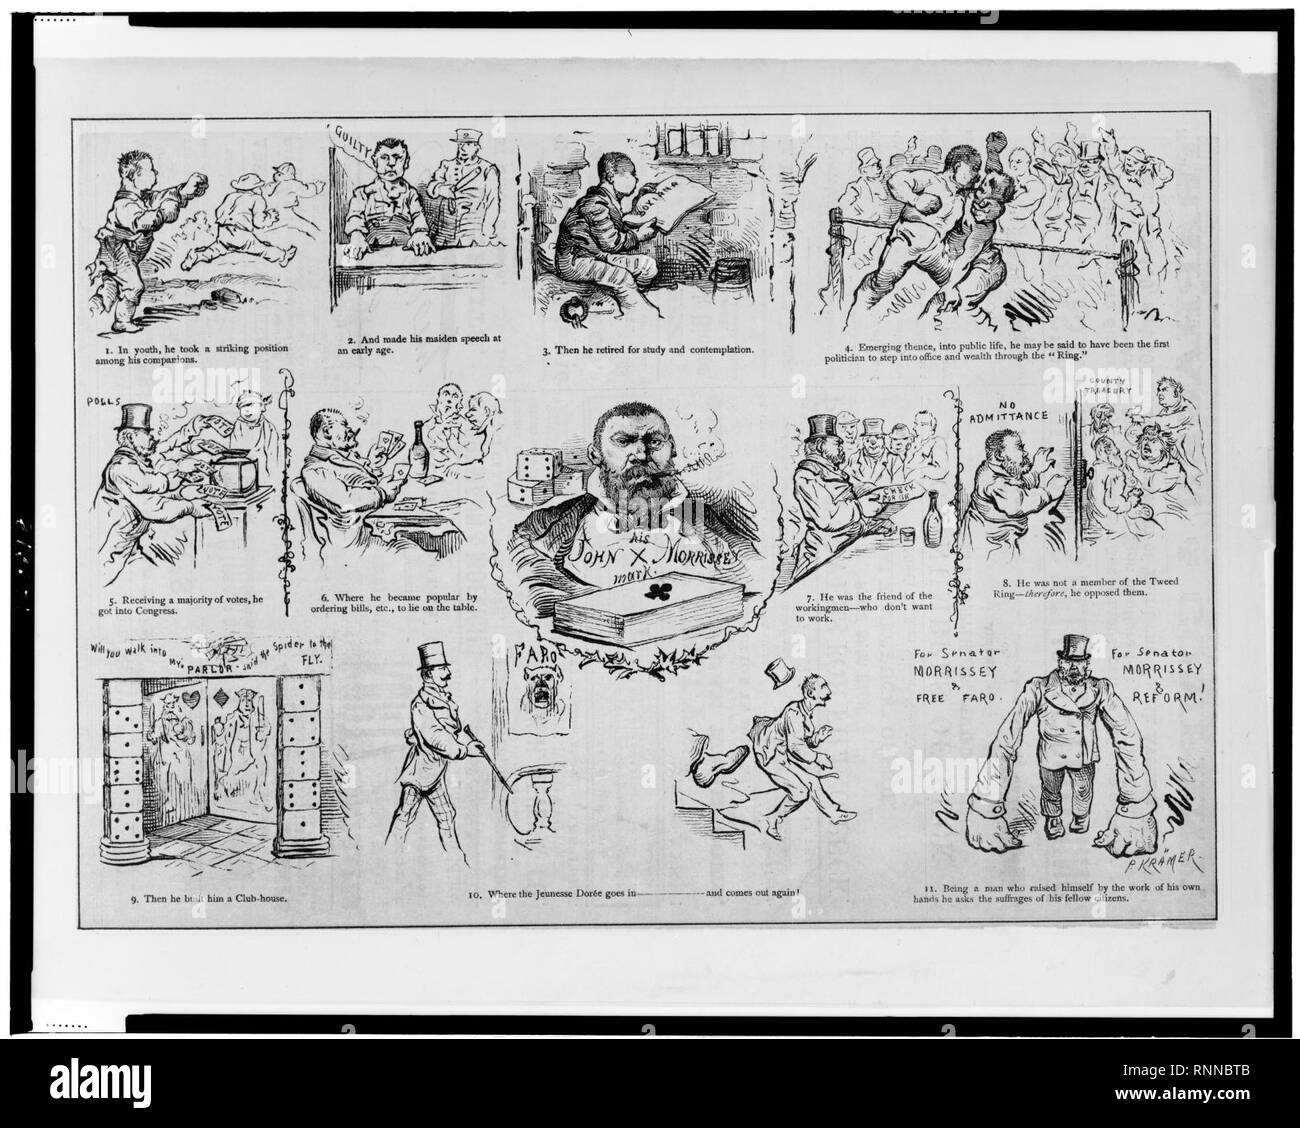 Cartoon depicting scenes in the life of John Morrissey, showing him as a fighter, in jail, as a politician, etc.) - P. Kramer Stock Photo